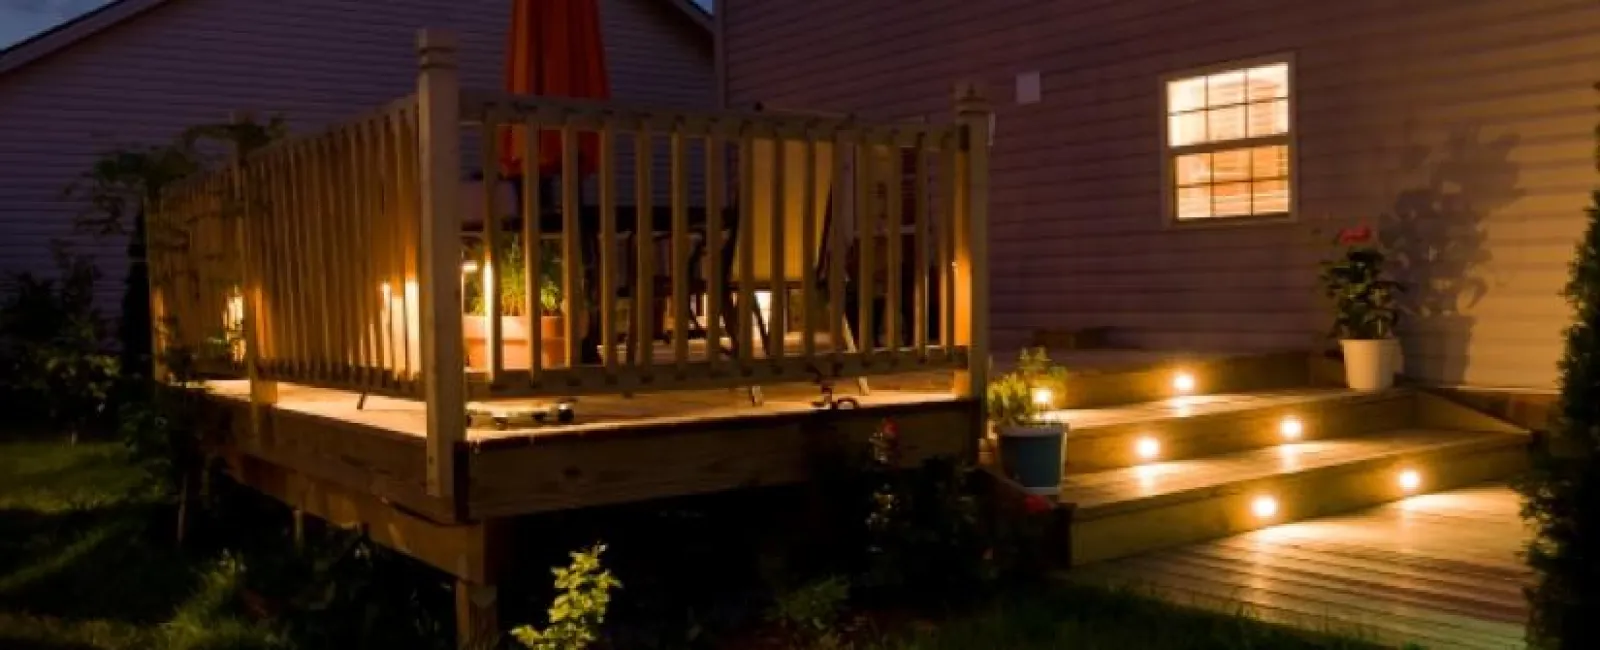 How to Power Your Outdoor Lights